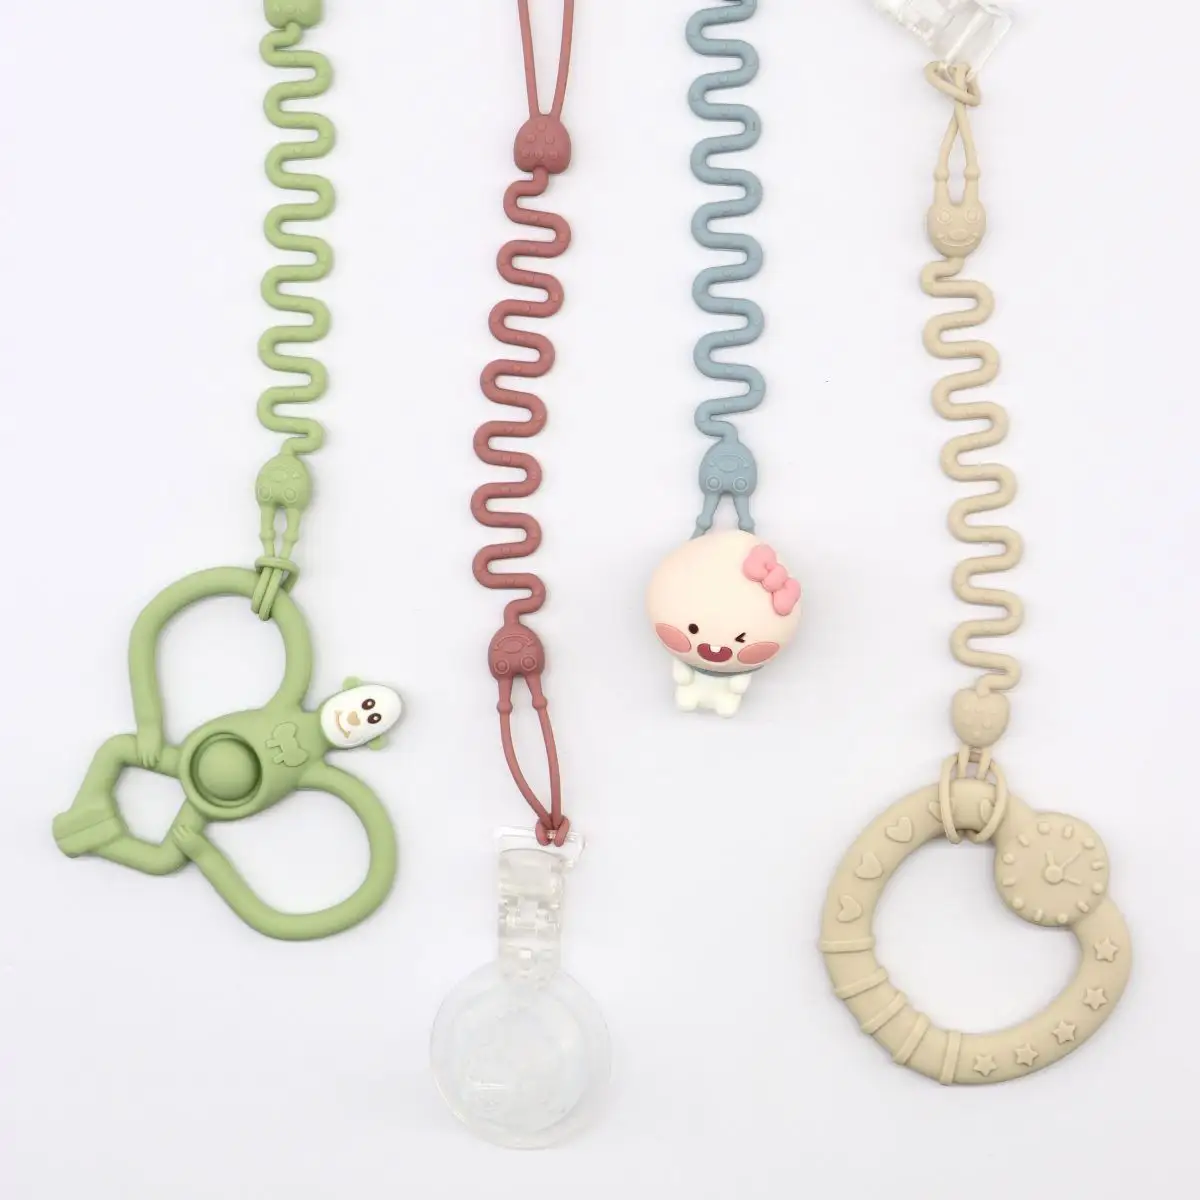 Custom Silicone Baby Pacifier Clip Holder Chain Anti-drop Cartoon Teething Toy Strap Baby Pacifier Holder Chain for Baby